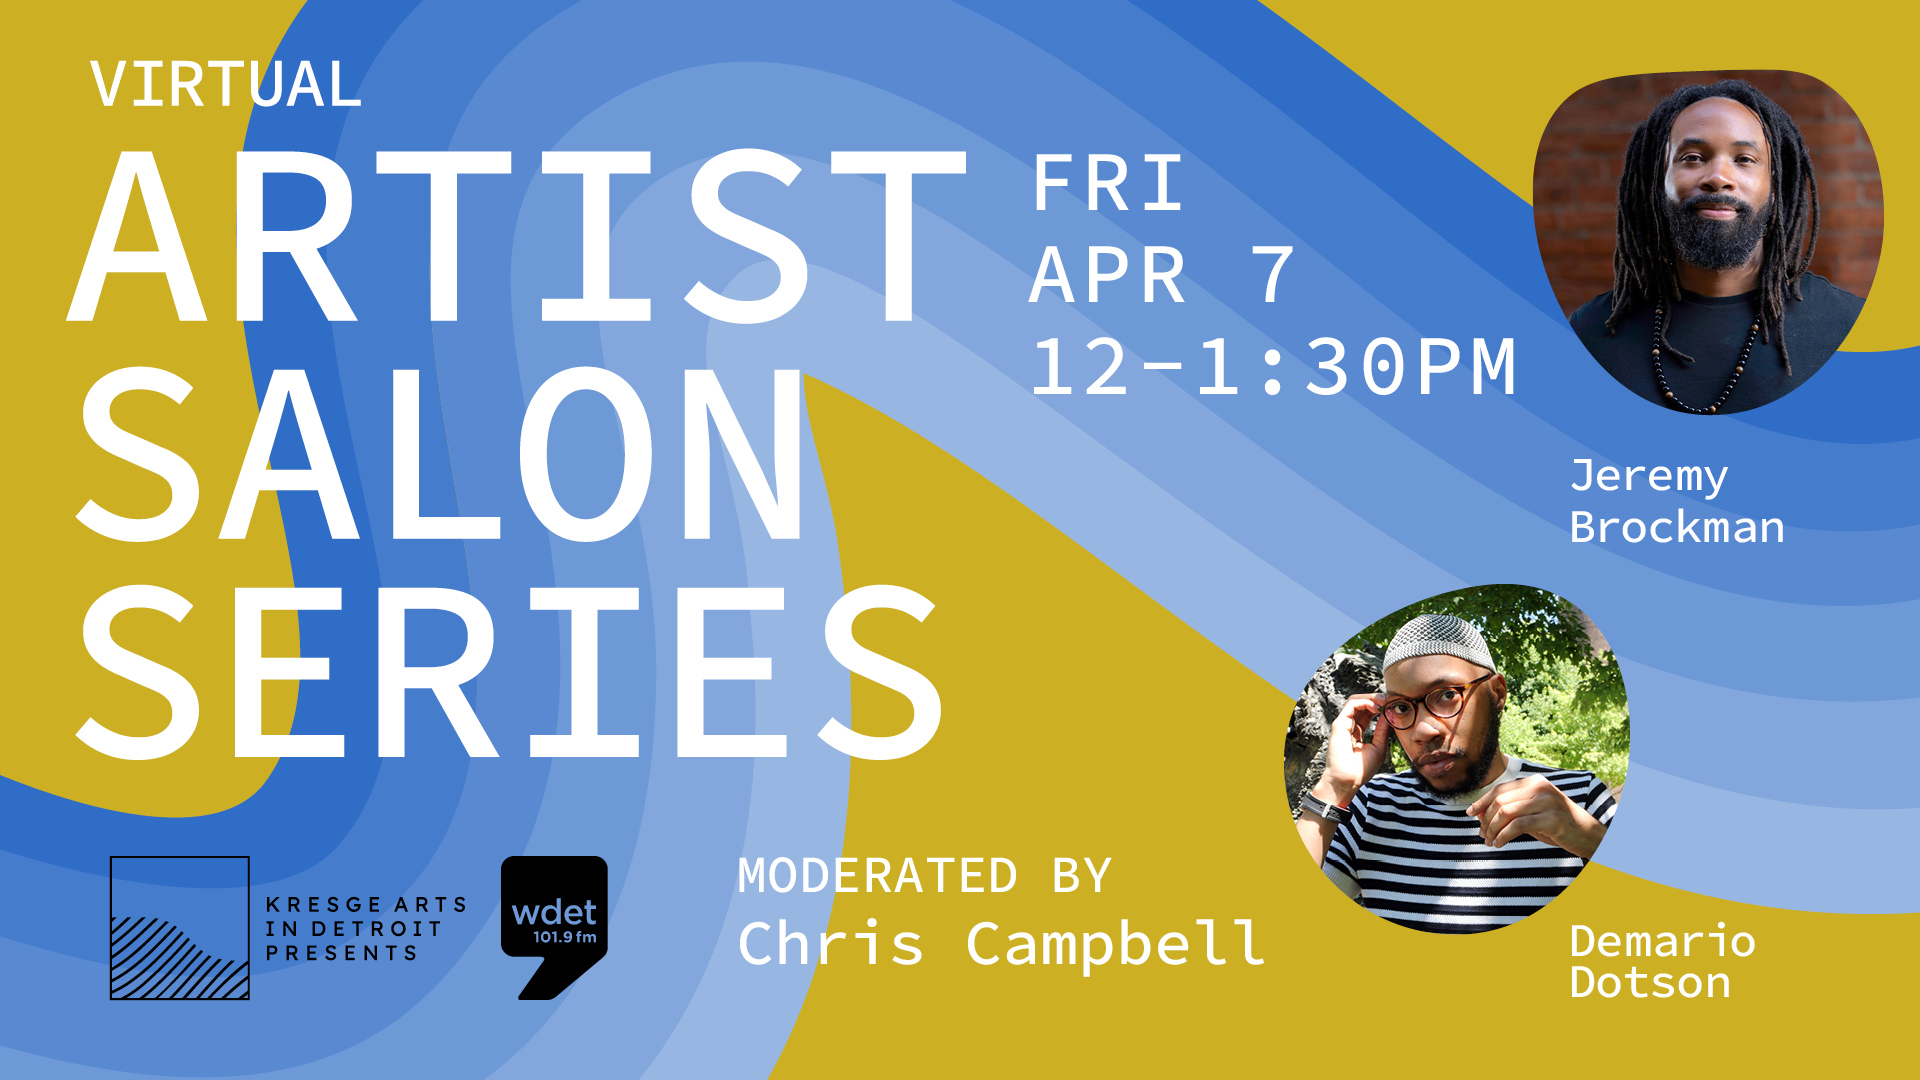 green and blue graphic promoting Kresge's Virtual Artist Salon Series with Jeremy Brockman and Demario Dotson